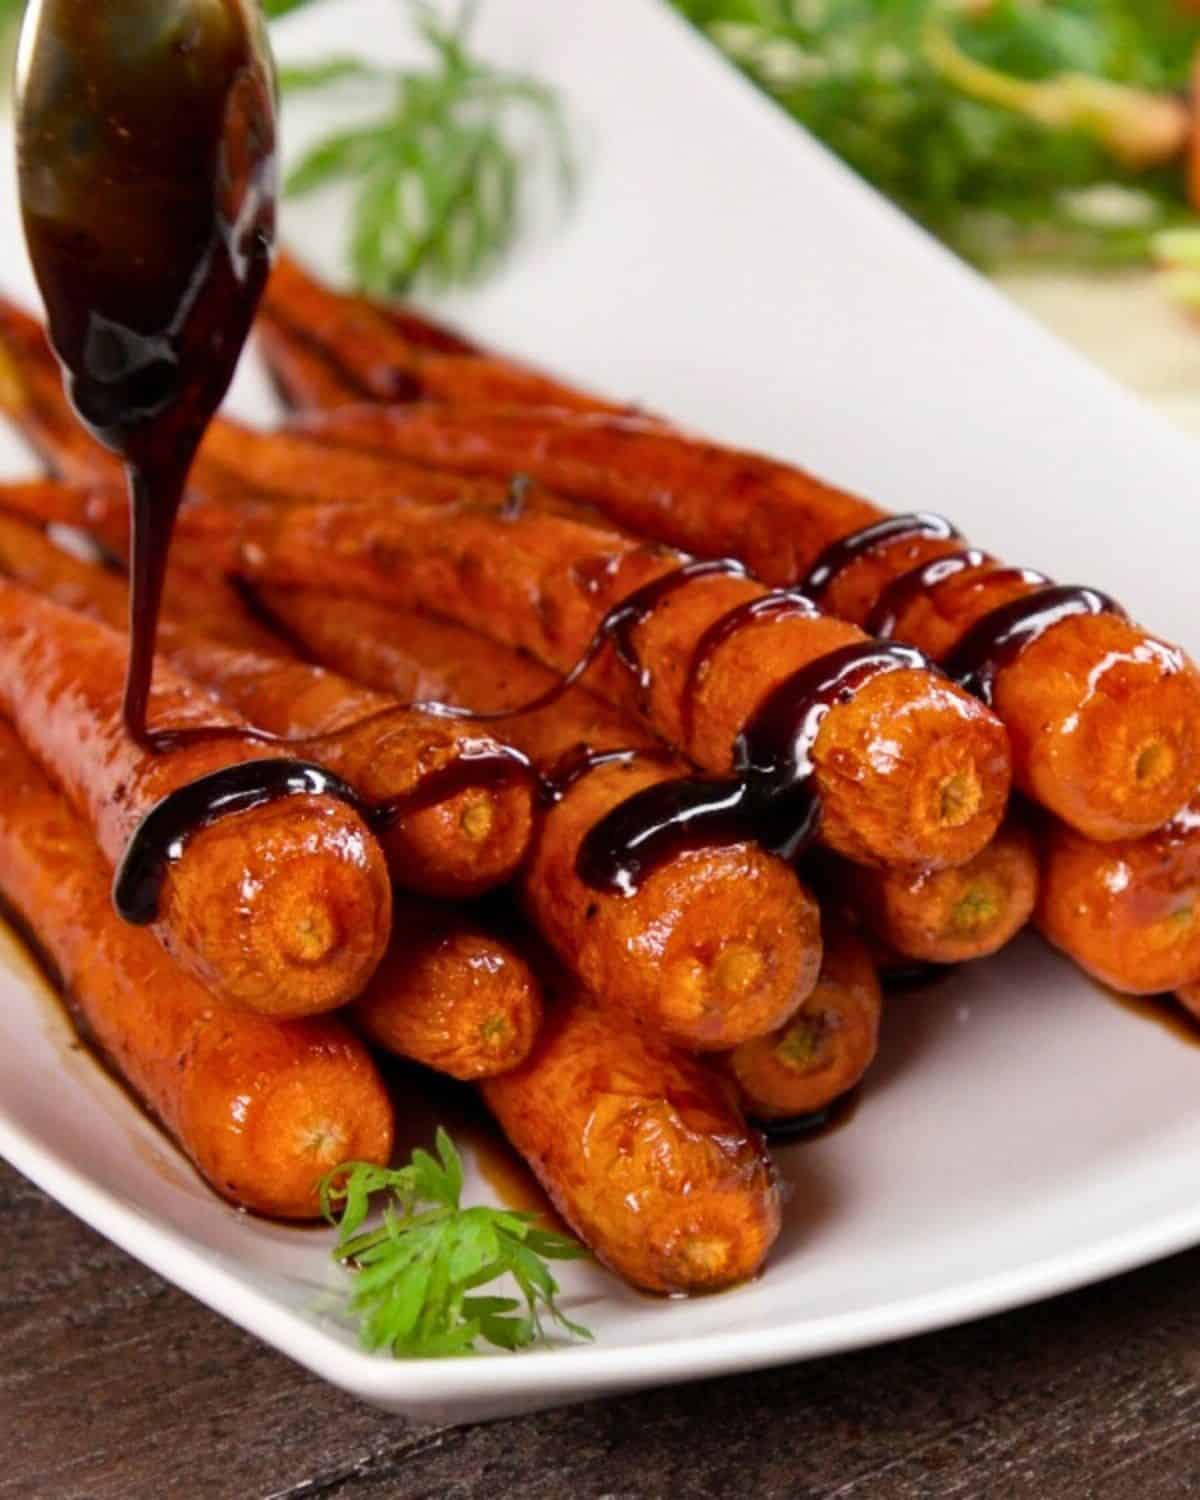 Roasted carrots with a dark honey-balsamic sauce on platter.